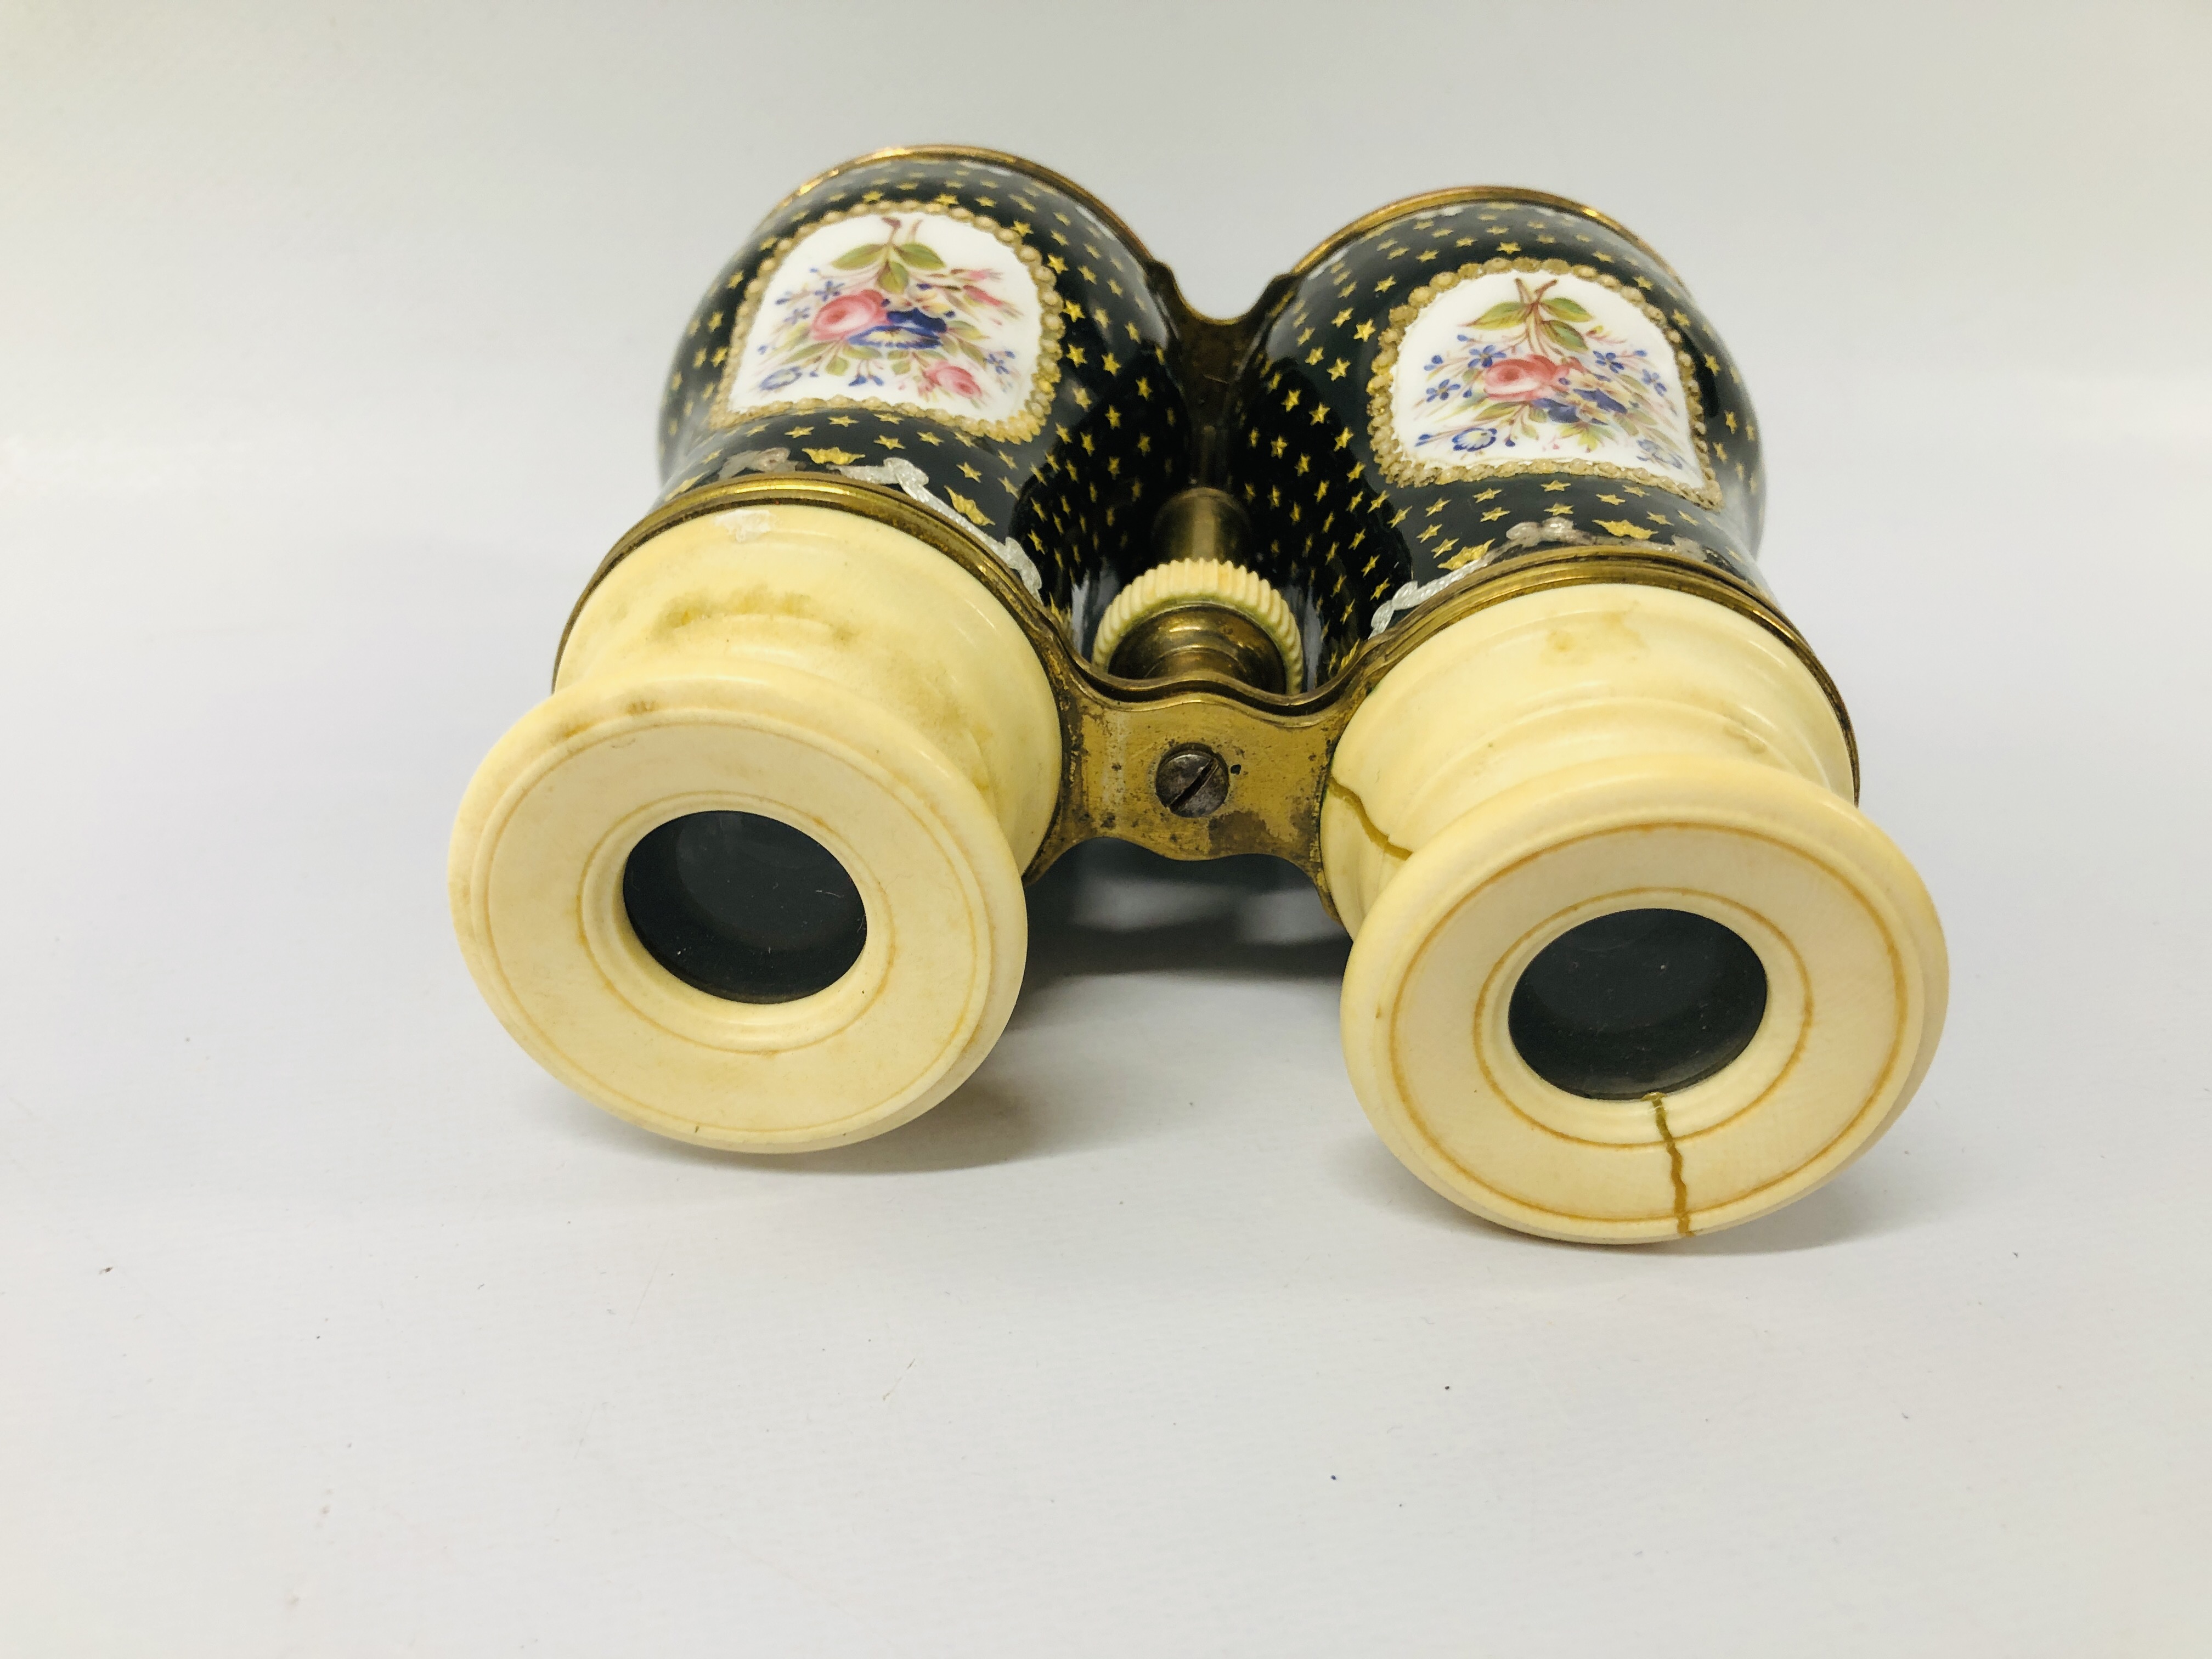 PAIR OF ANTIQUE IVORY AND ENAMEL OPERA GLASSES C1880 - Image 6 of 8